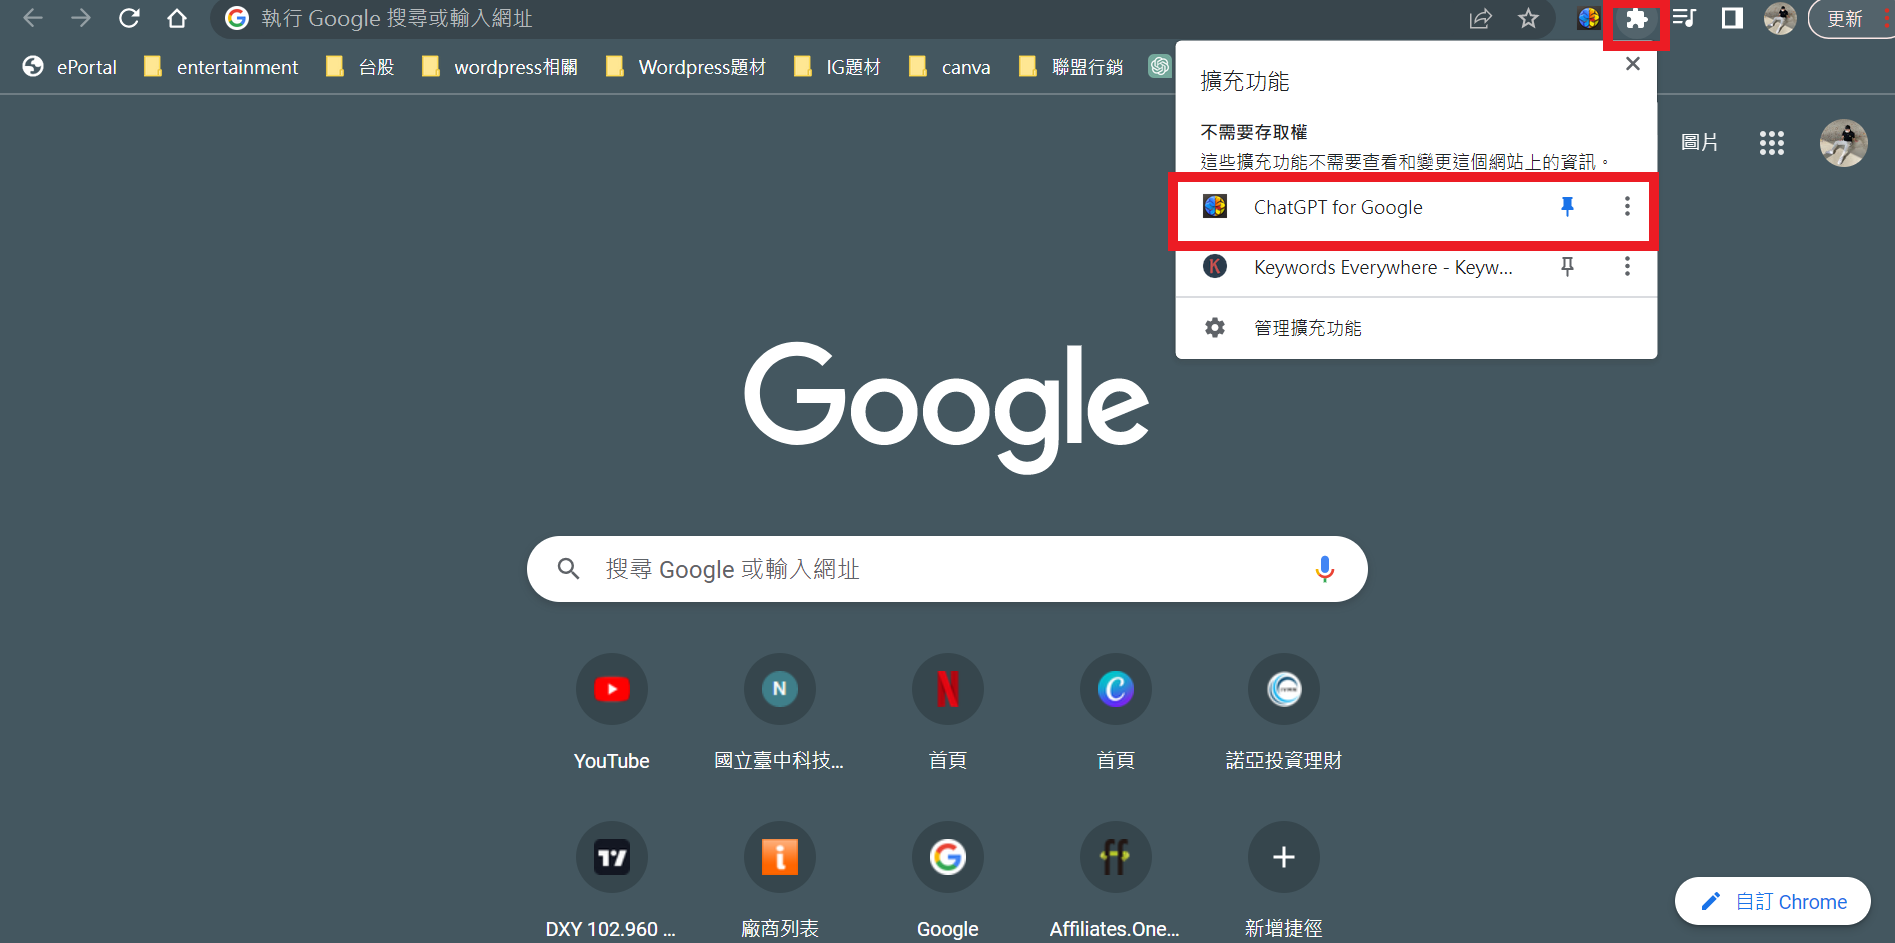 ChatGPT for Google how to use